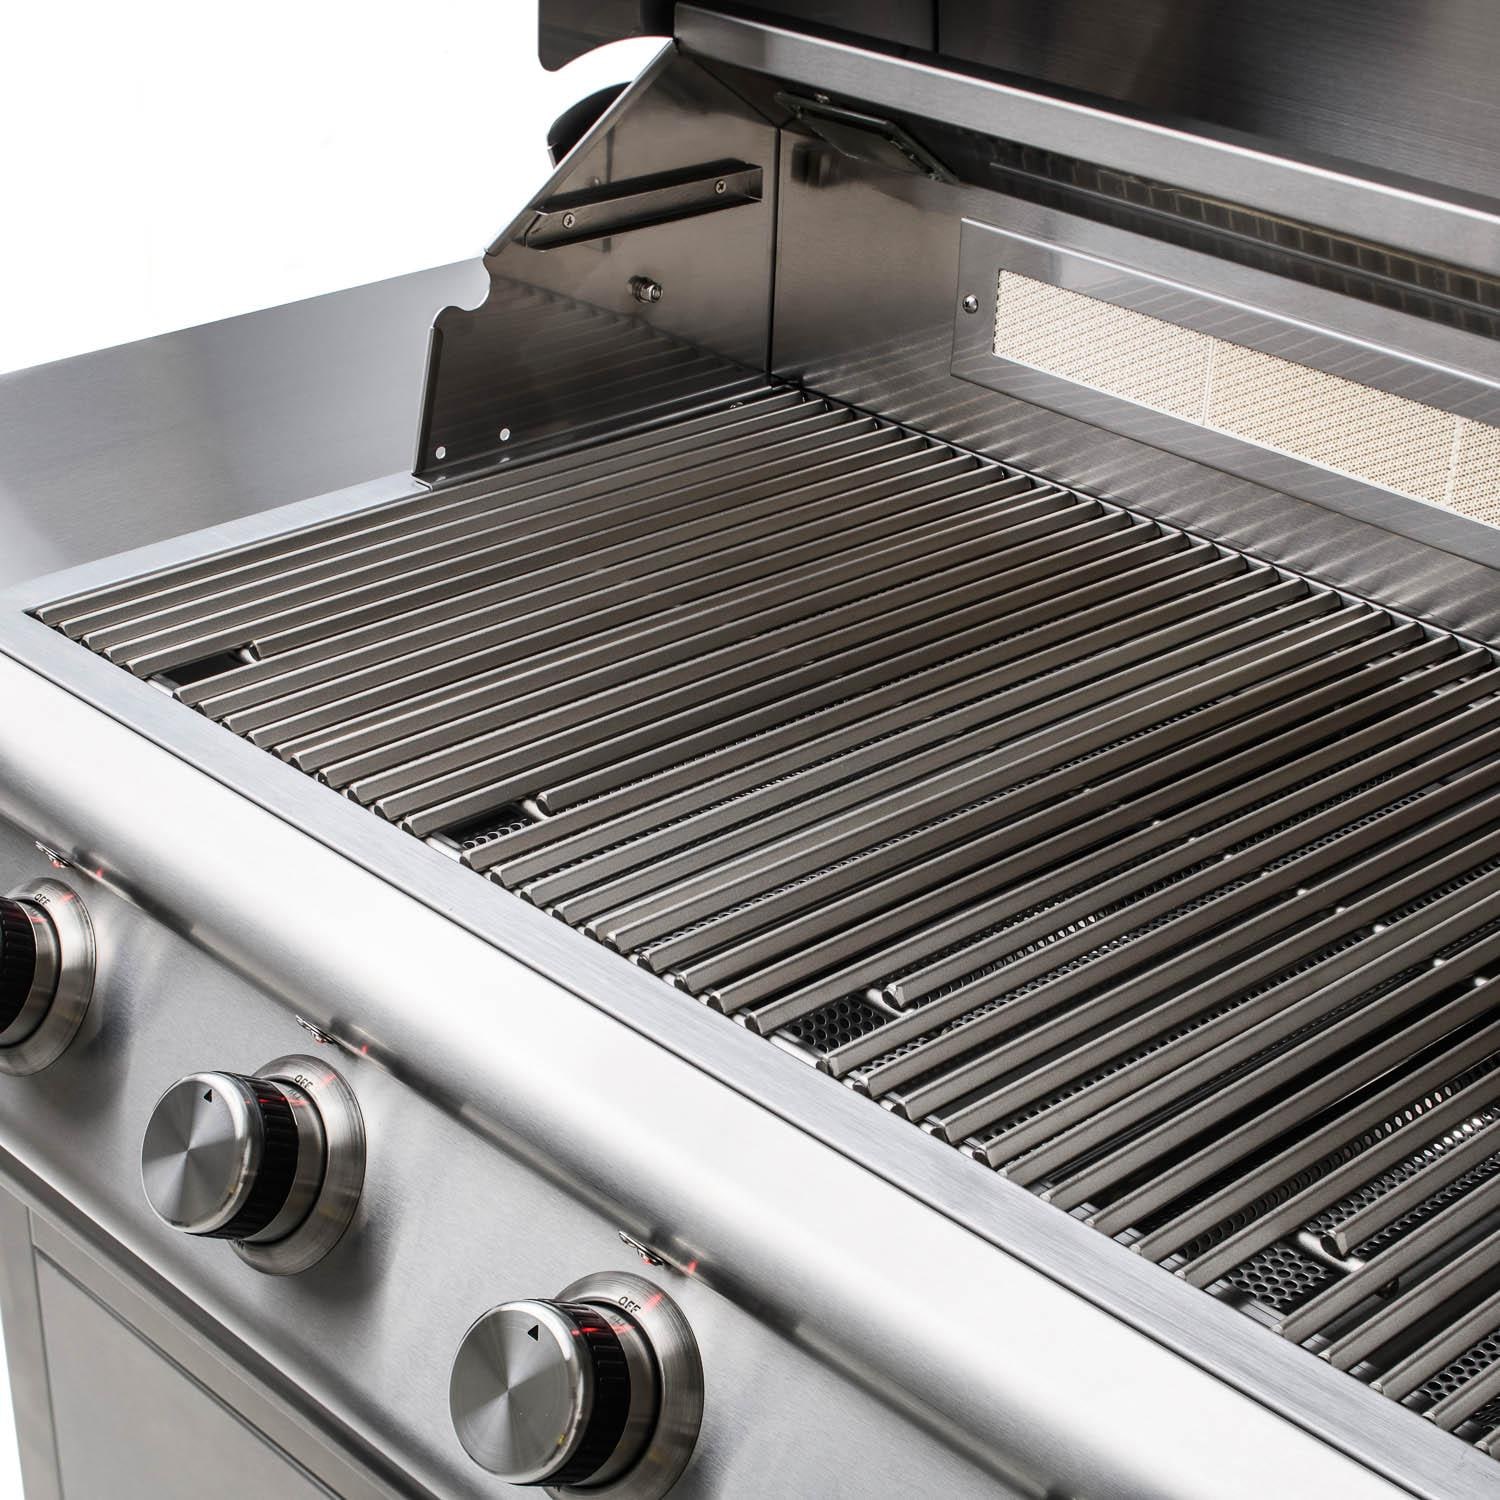 Blaze Marine Grade Stainless Steel Built-In Natural Gas Grill with Lights, 32" - image 3 of 6